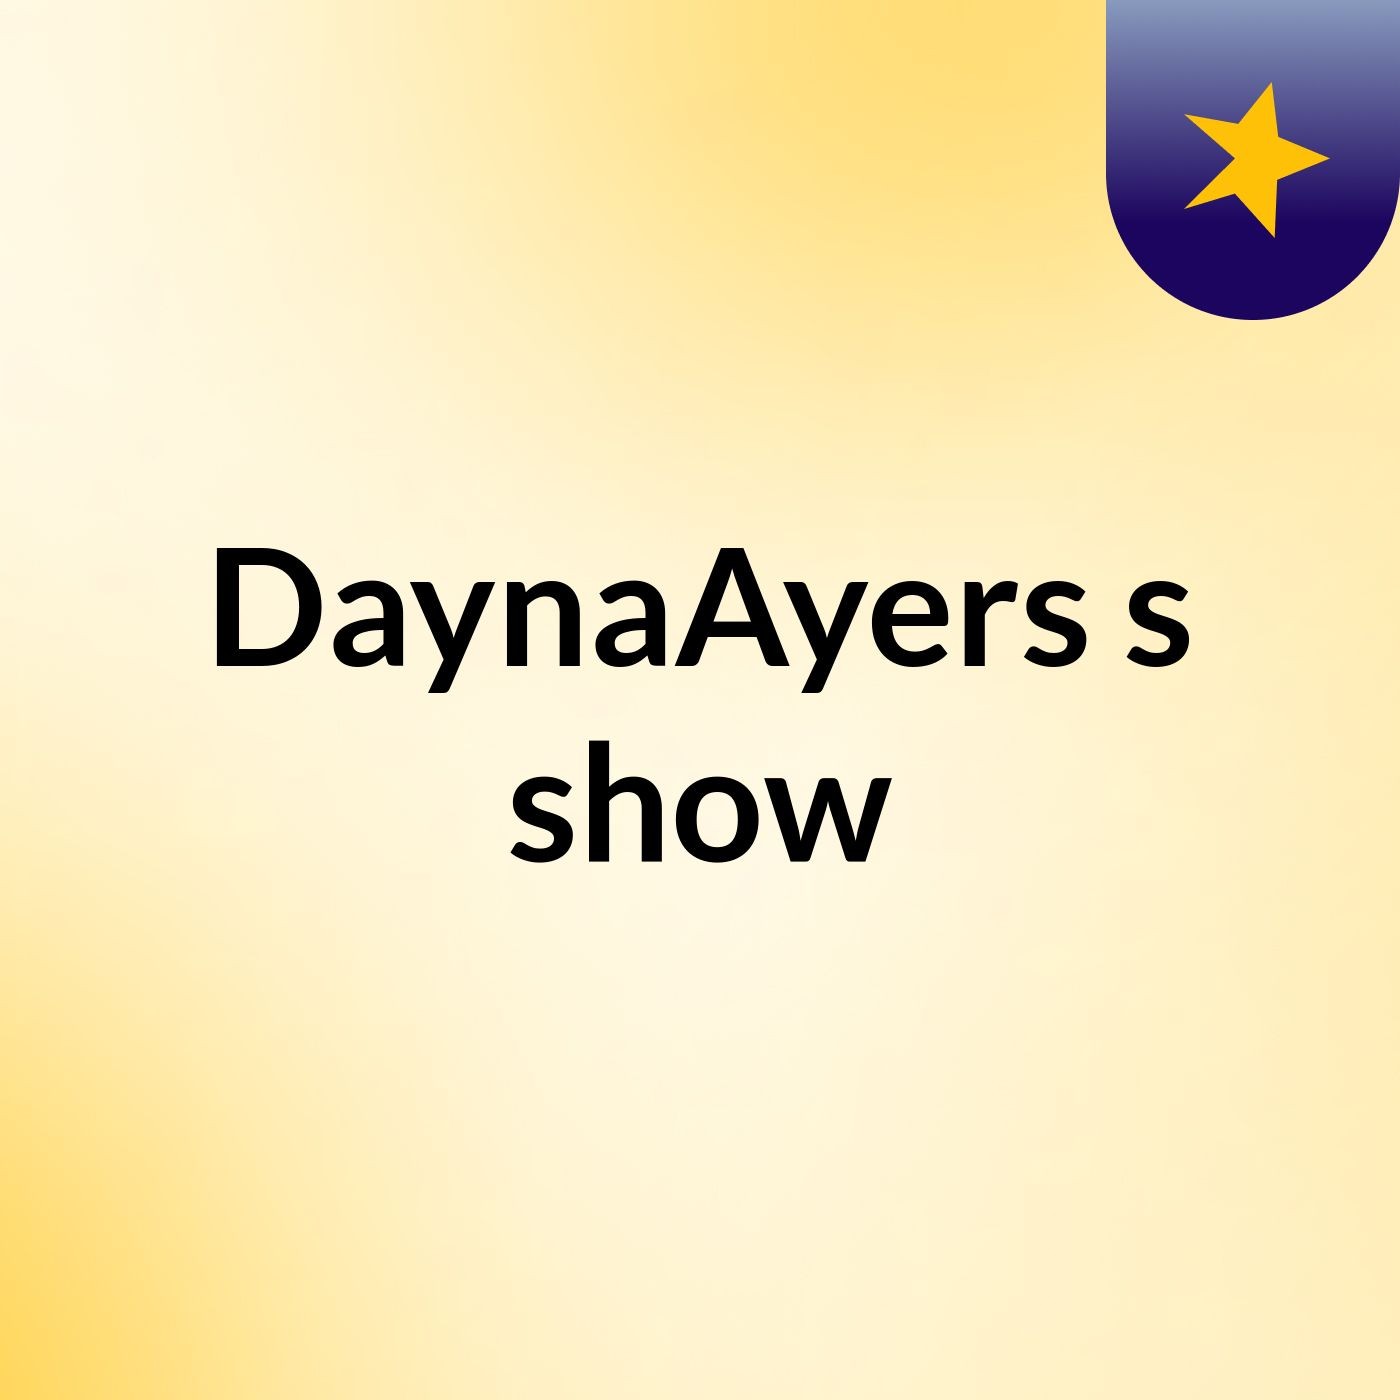 DaynaAyers's show